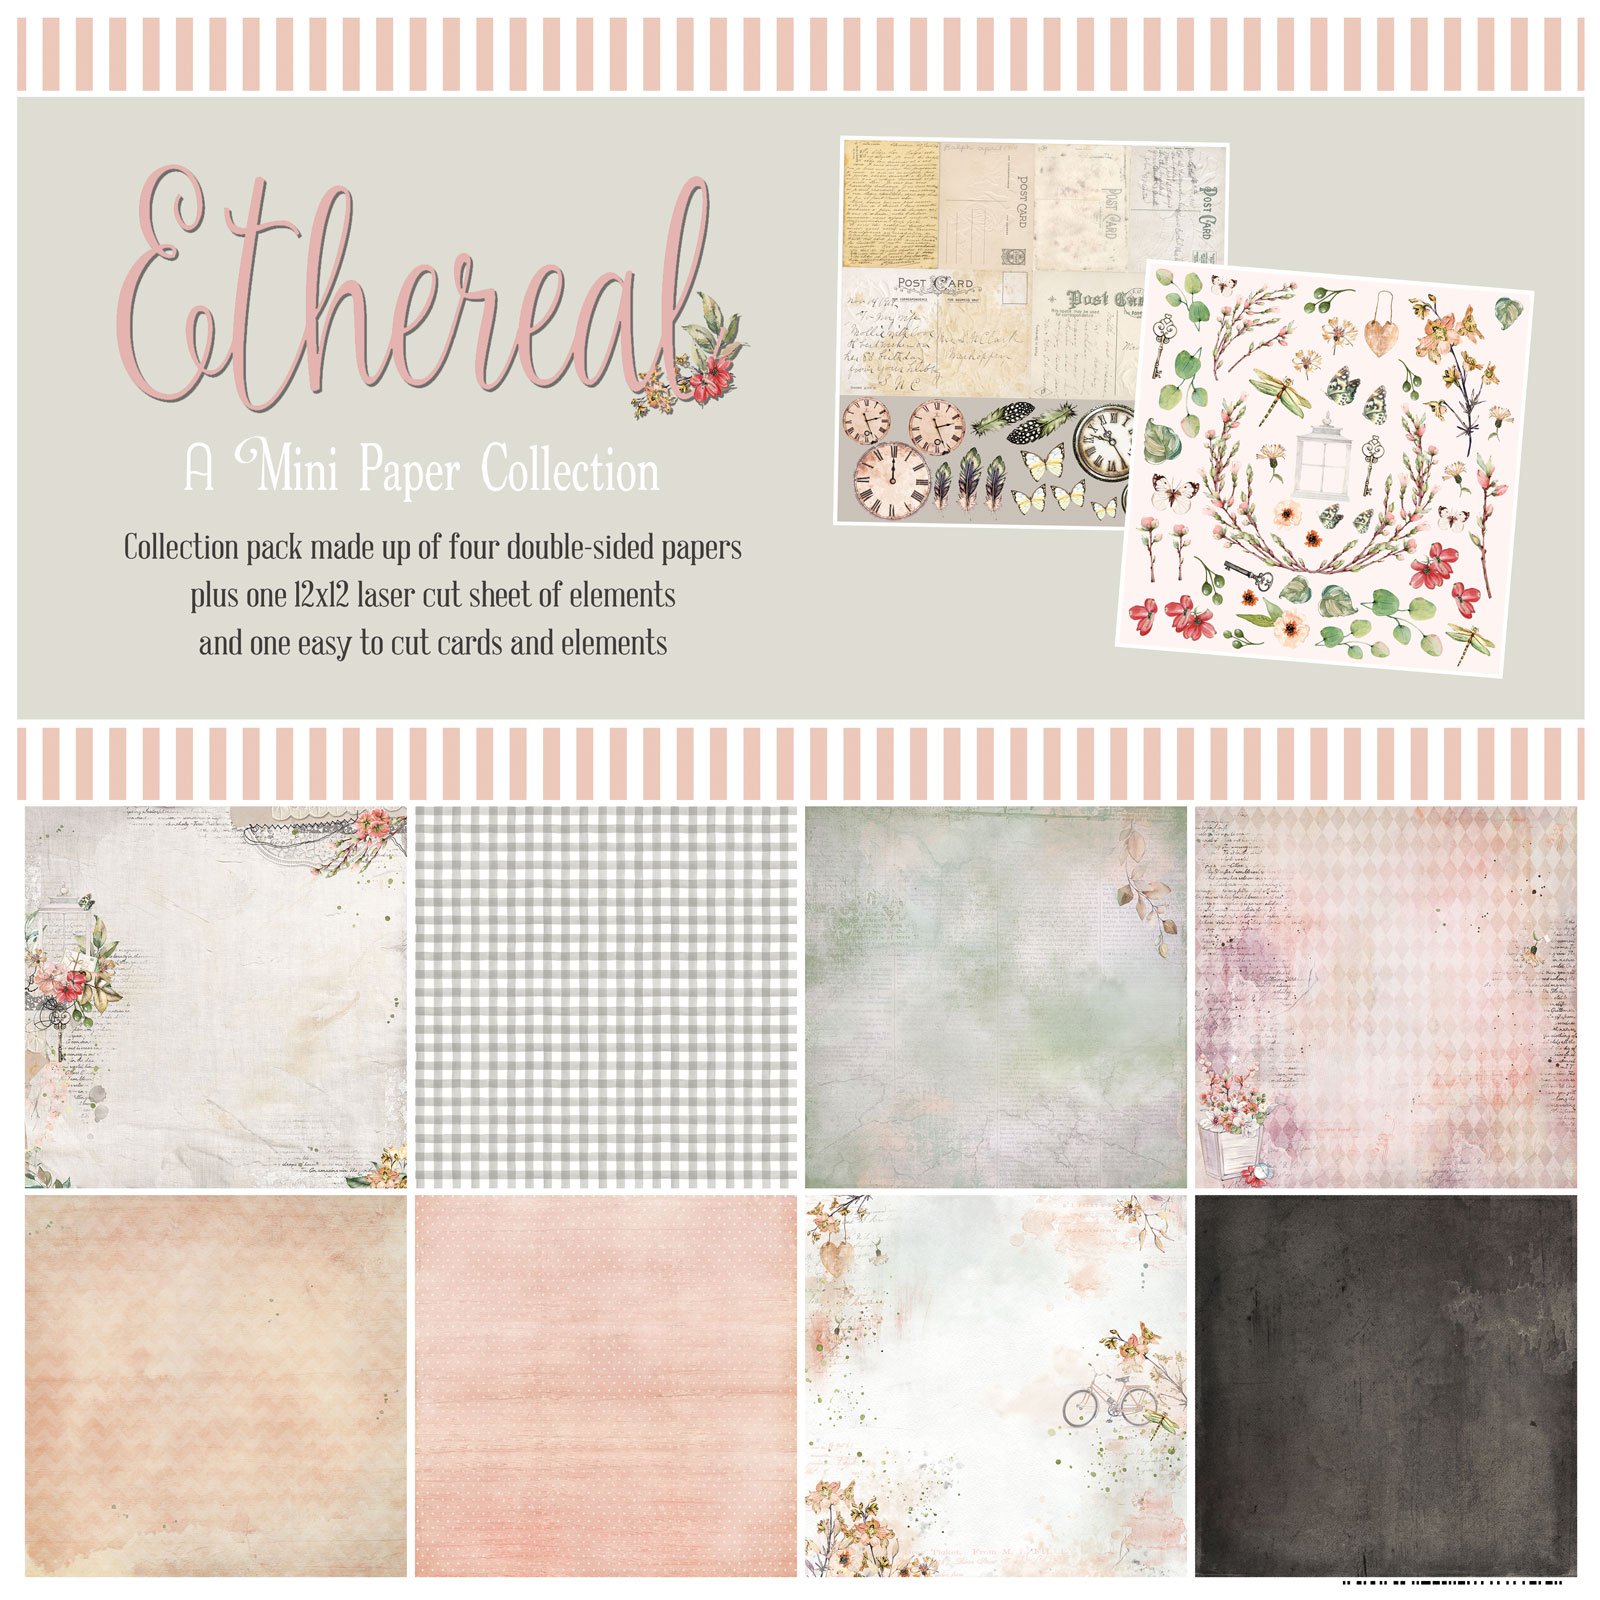 A Mini Paper Collection - Ethereal